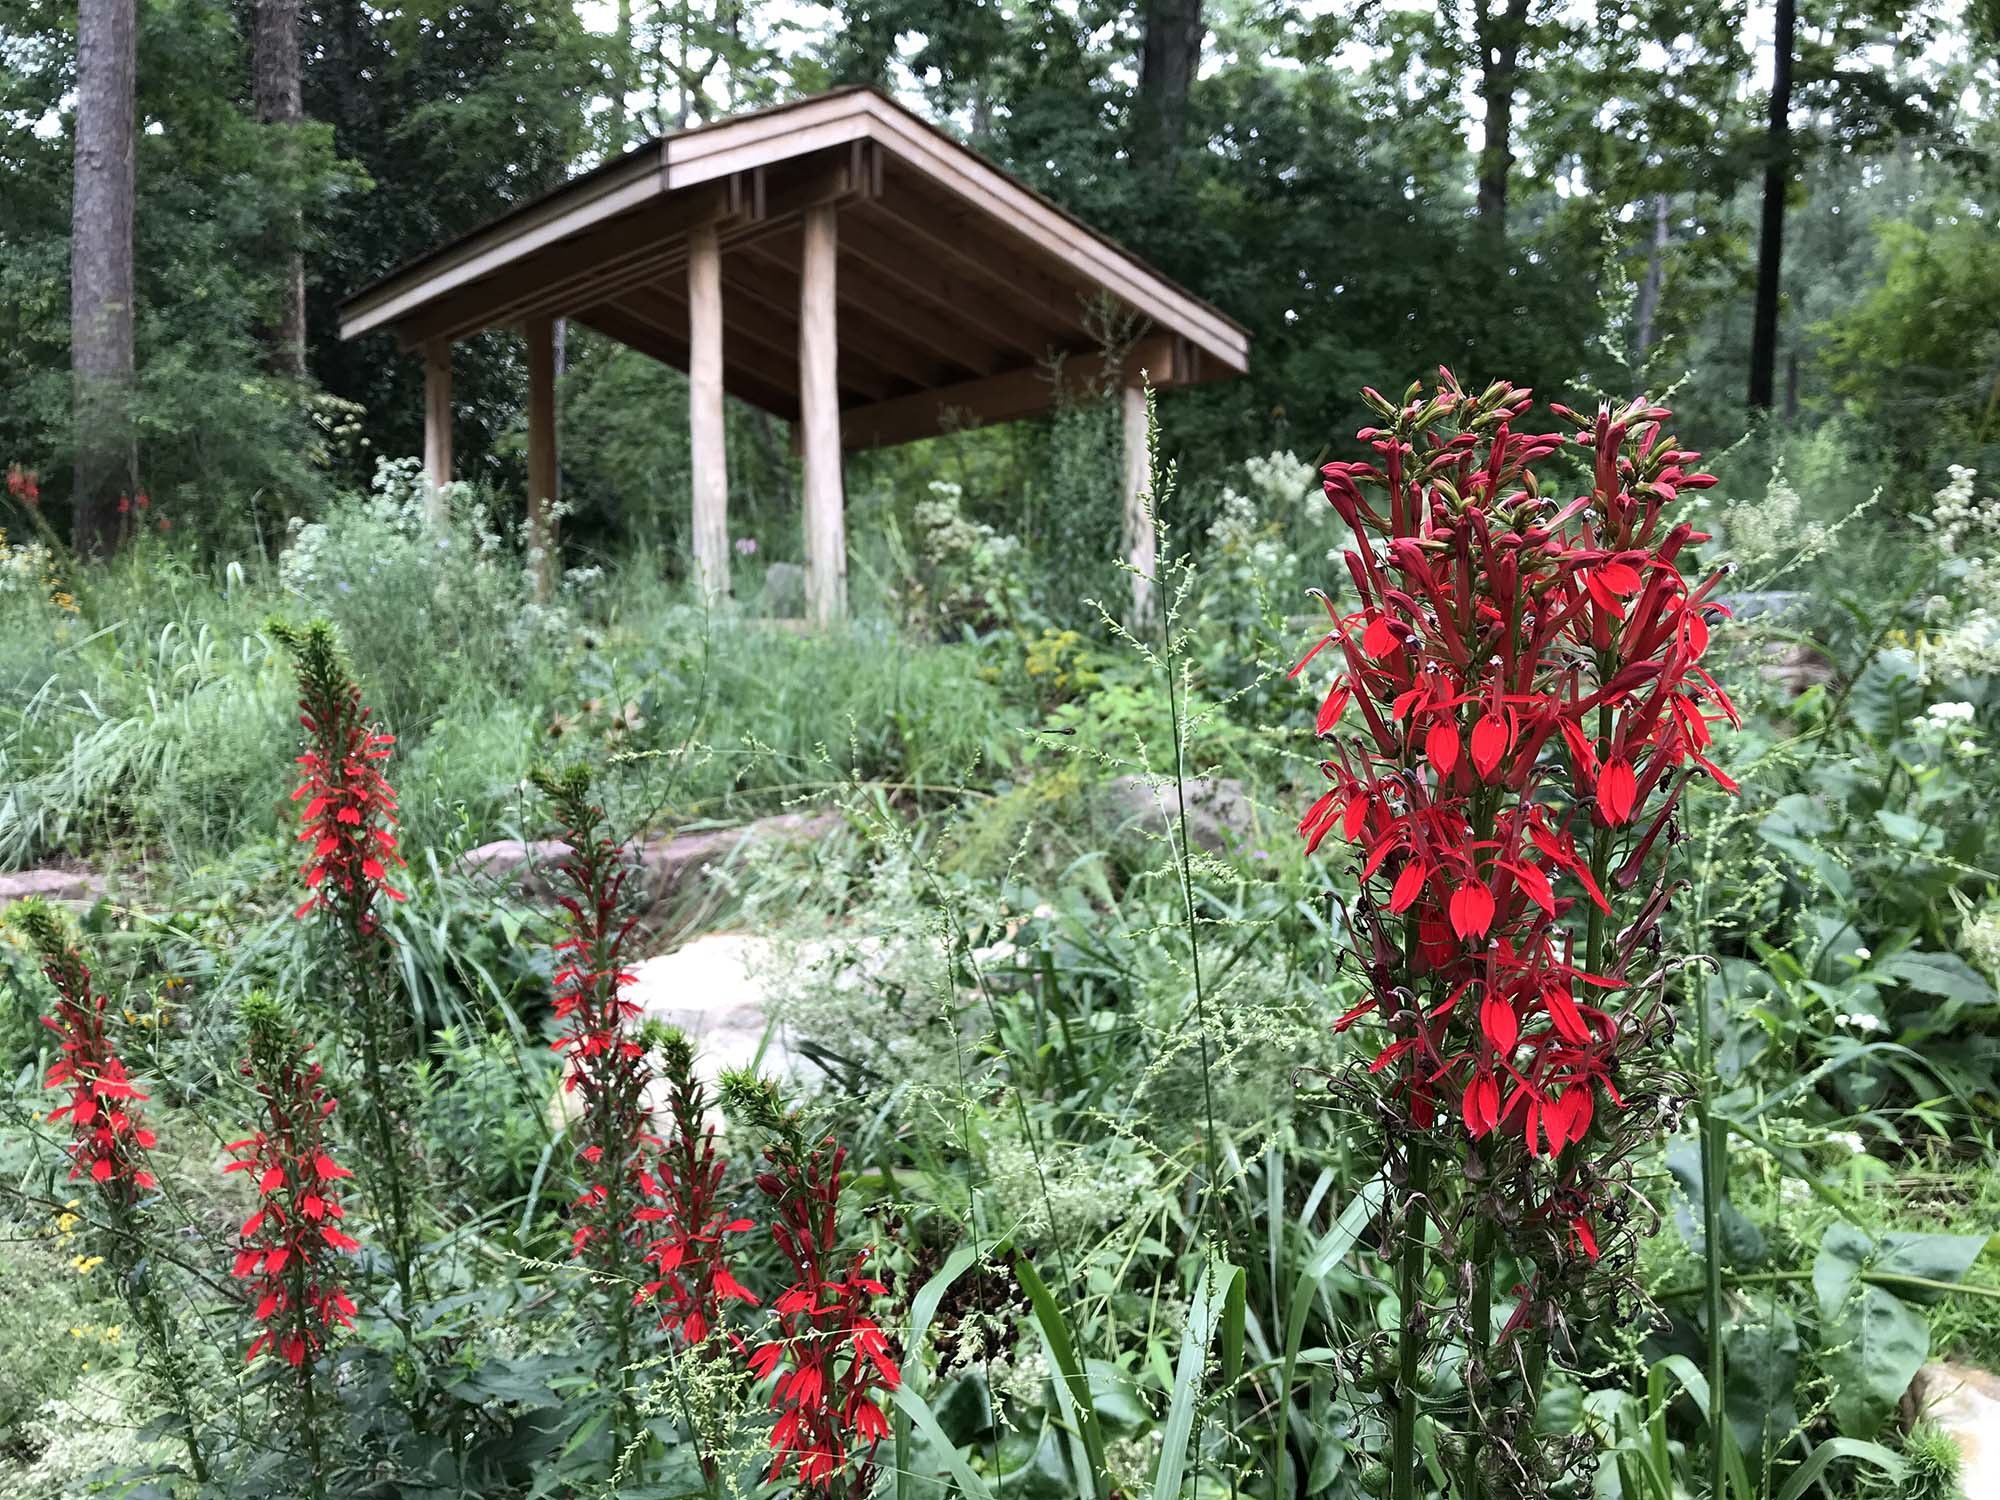 Tall red cardinal flowers (Lobelia cardinalis) growing in front of the open-air wood shelter at the new south entrance to the Blomquist Garden.